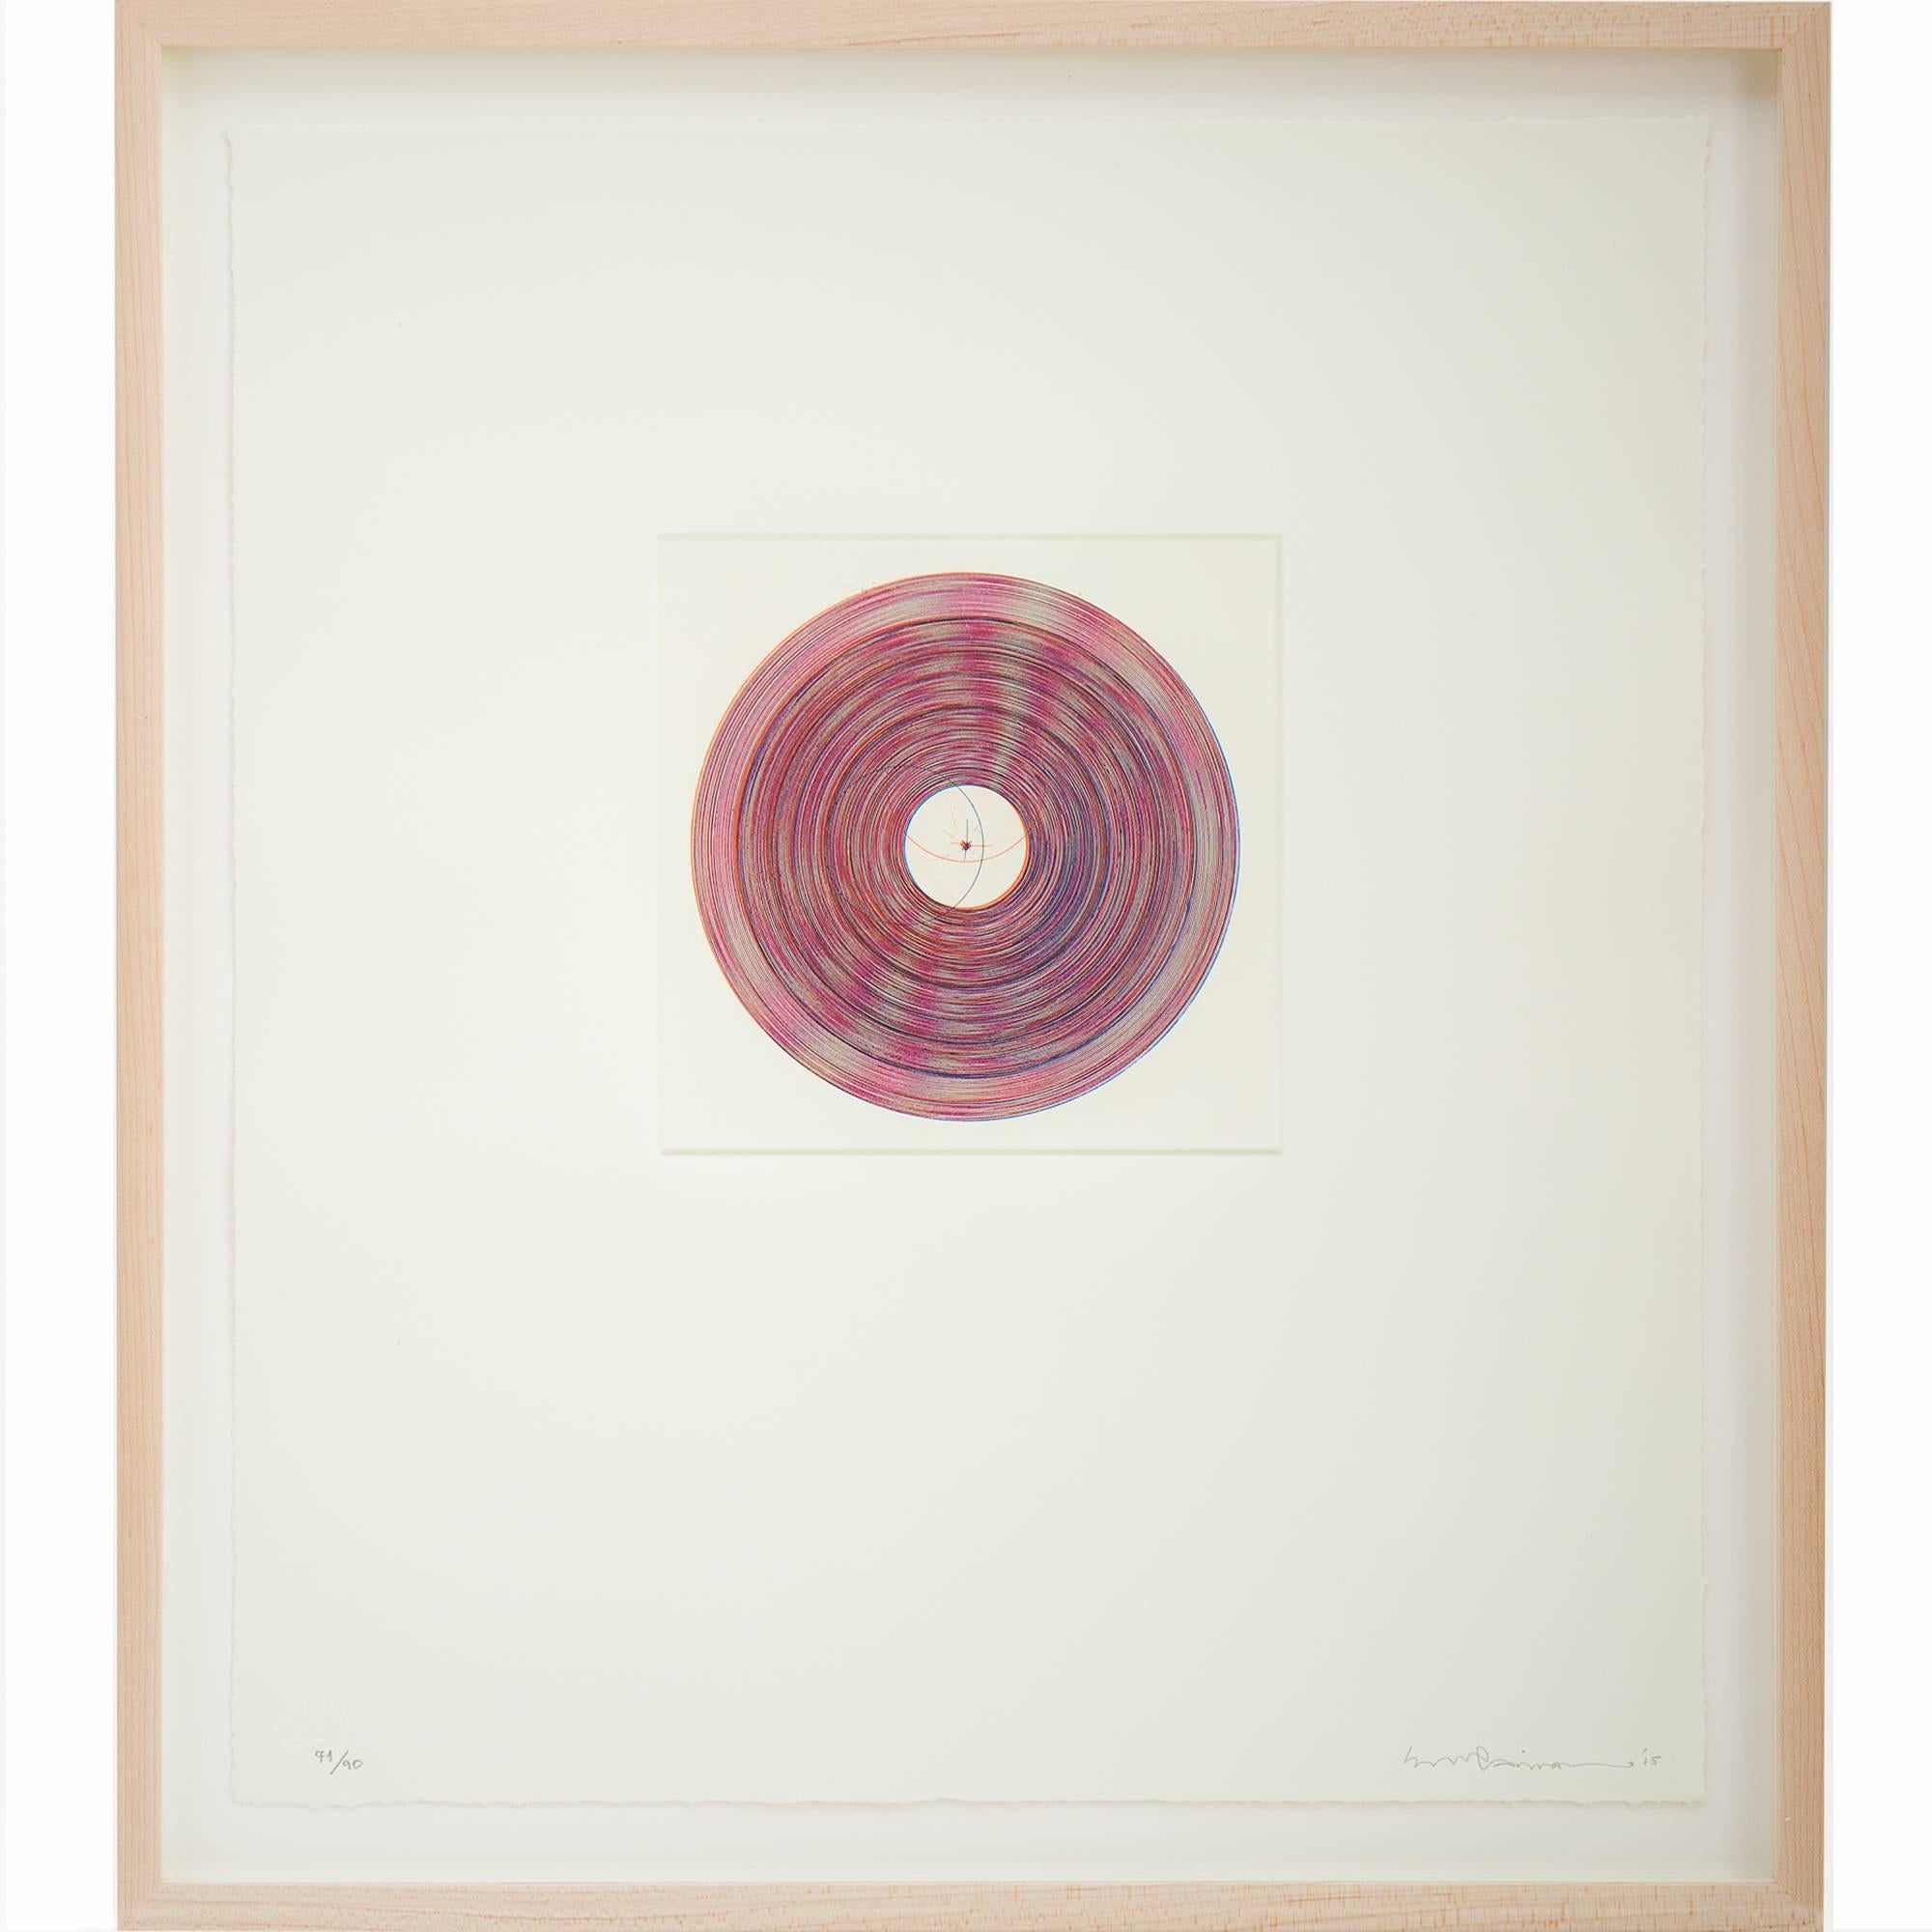 Ernesto Caivano Abstract Print - Electron Orbits, Photon Release, and Entanglements, unique print, 2015